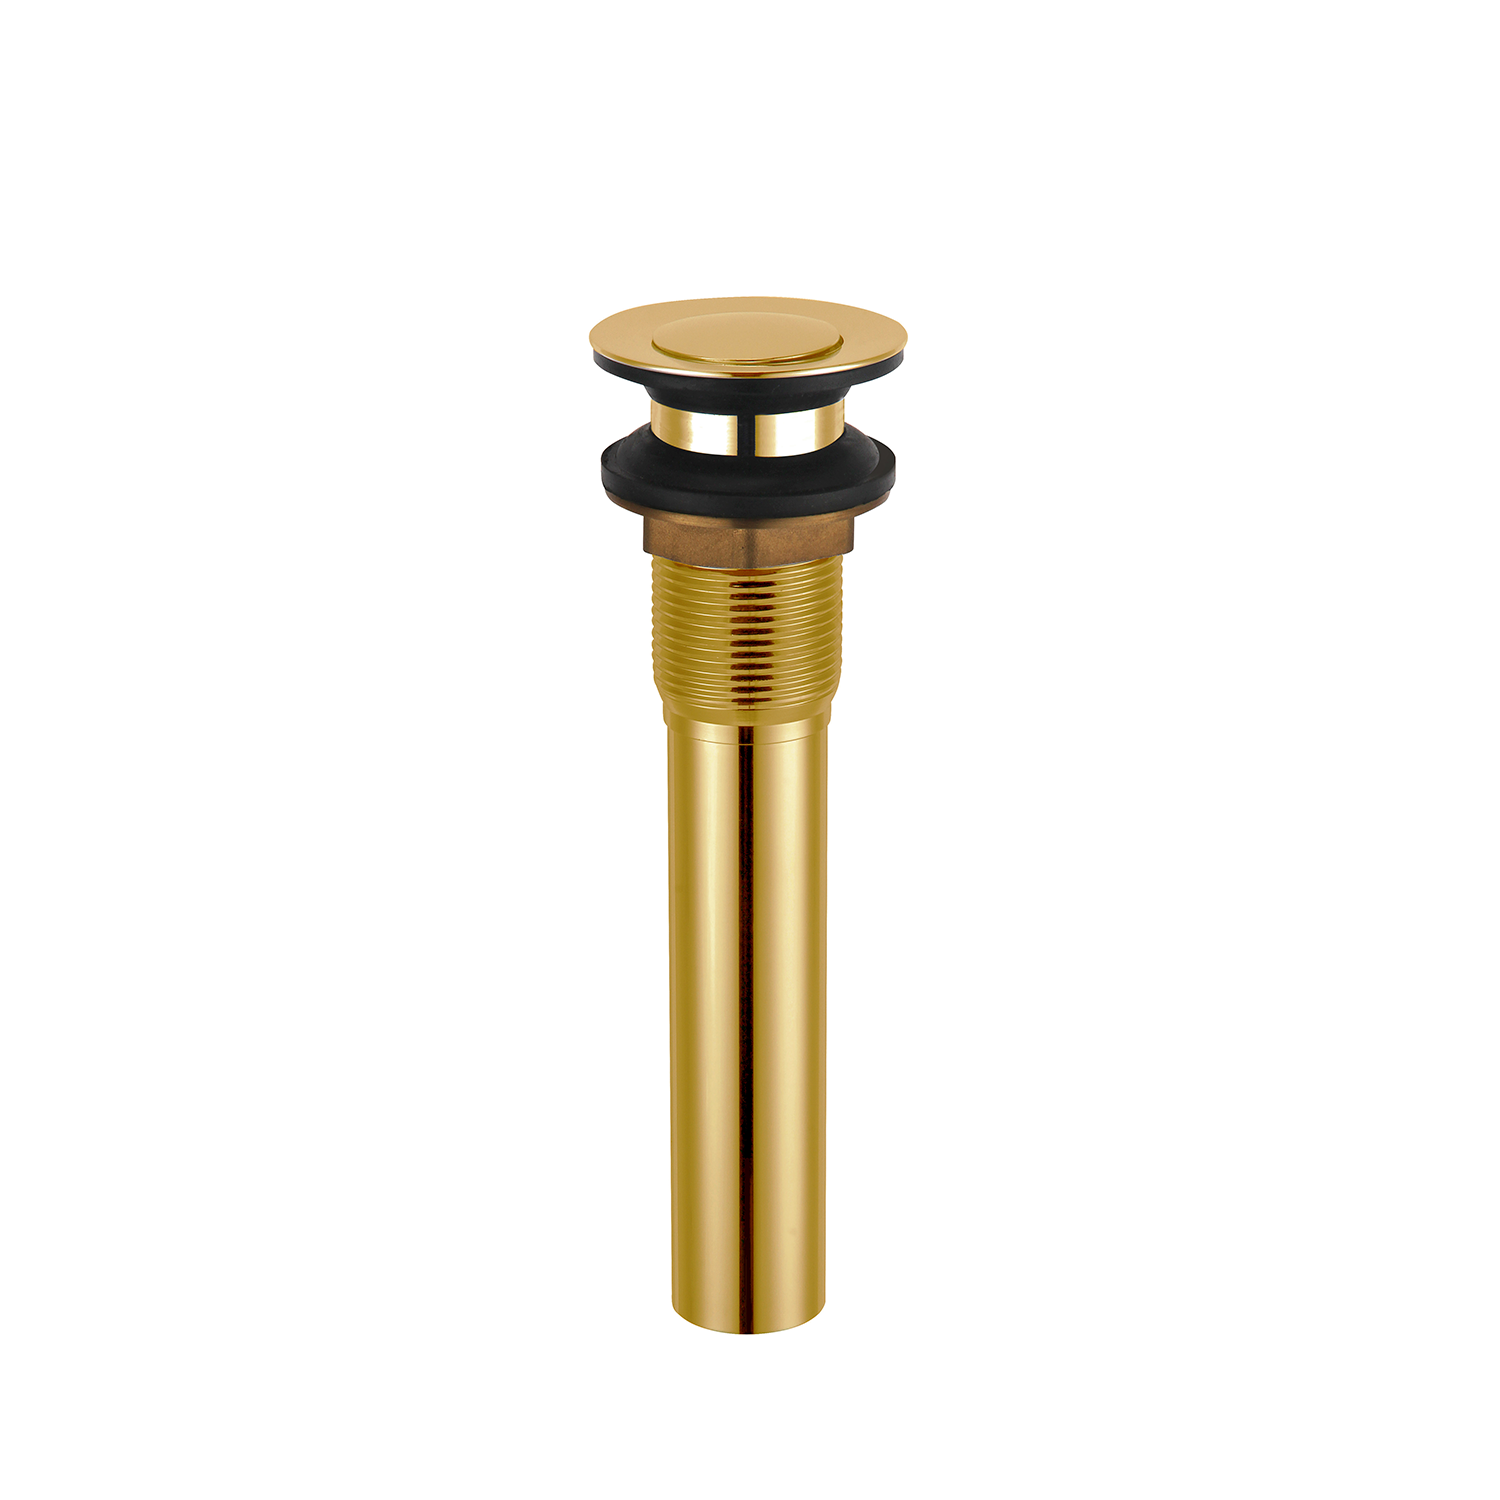 DAX Round Vanity Sink Pop up Drain without Overflow - Brushed Gold (DAX-82018-BG)